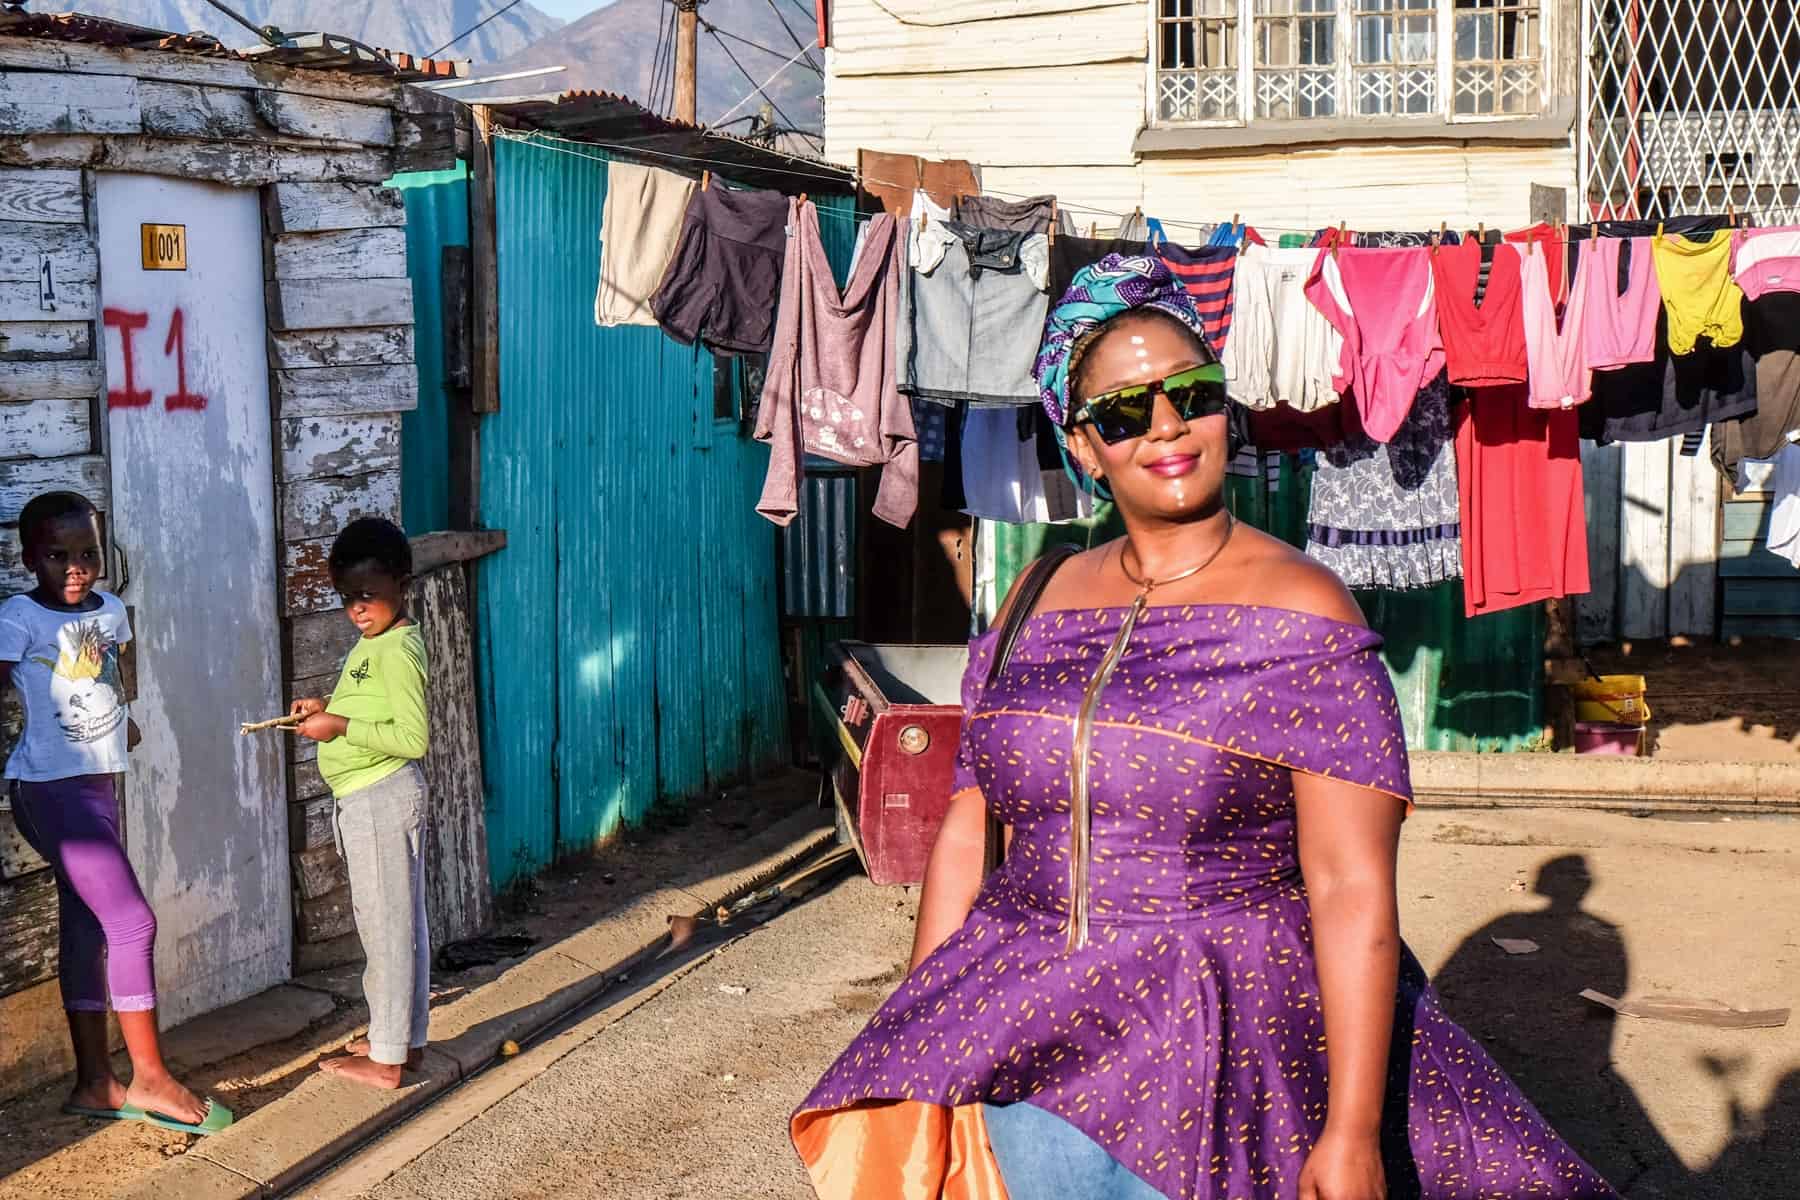 A local woman, Thembi, dressed in purple, takes visitors on a tour of her home township Kayamandi. Behind her is a row of washing, two children and some iron huts.